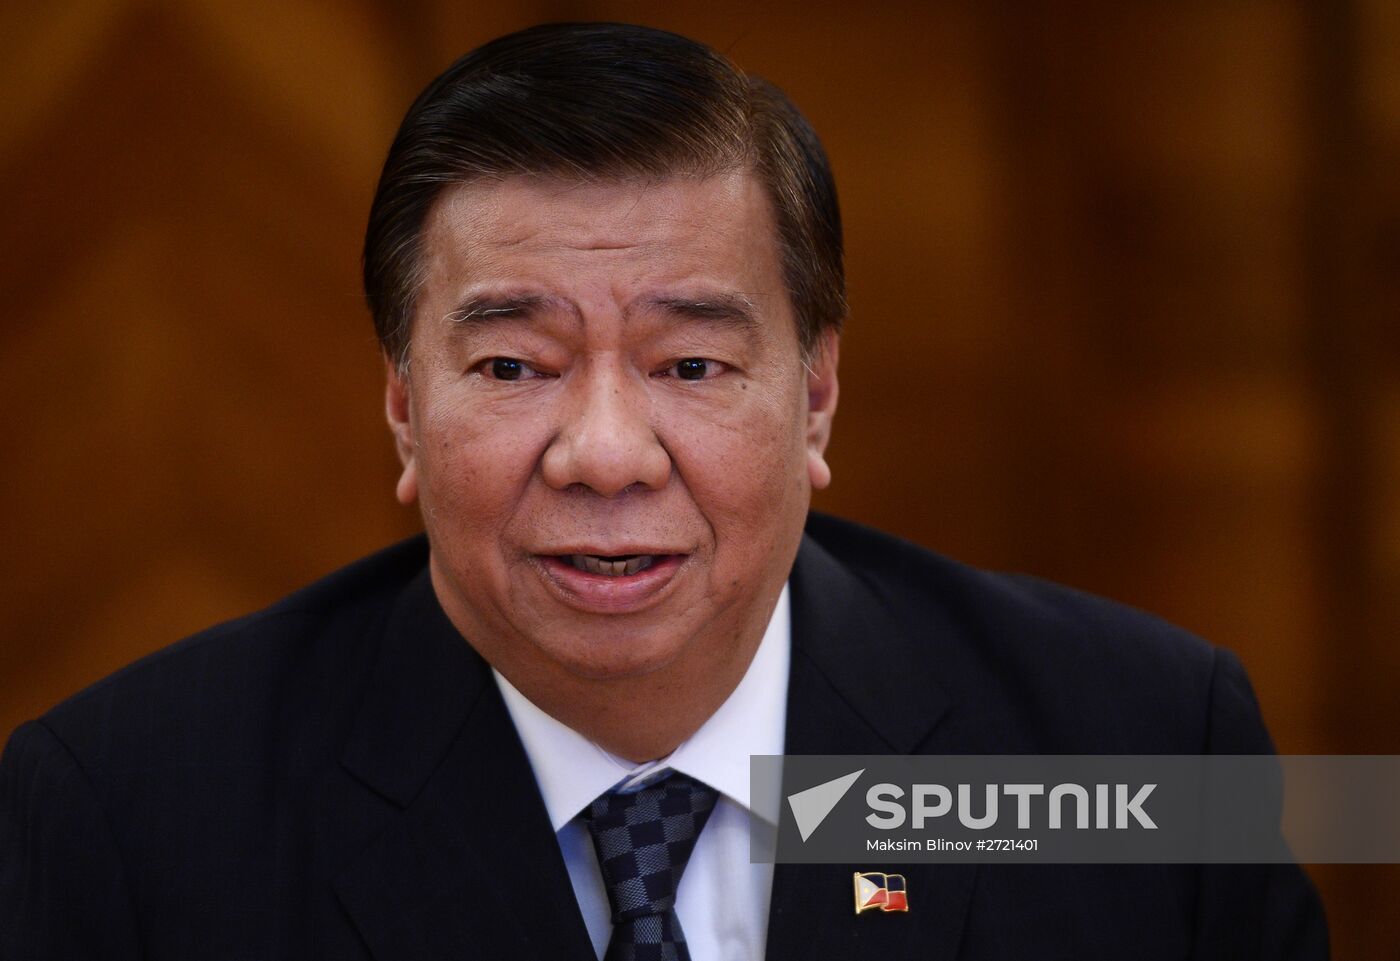 Russian Foreign Minister Sergey Lavrov meets with Philippines Senate President Franklin Drilon